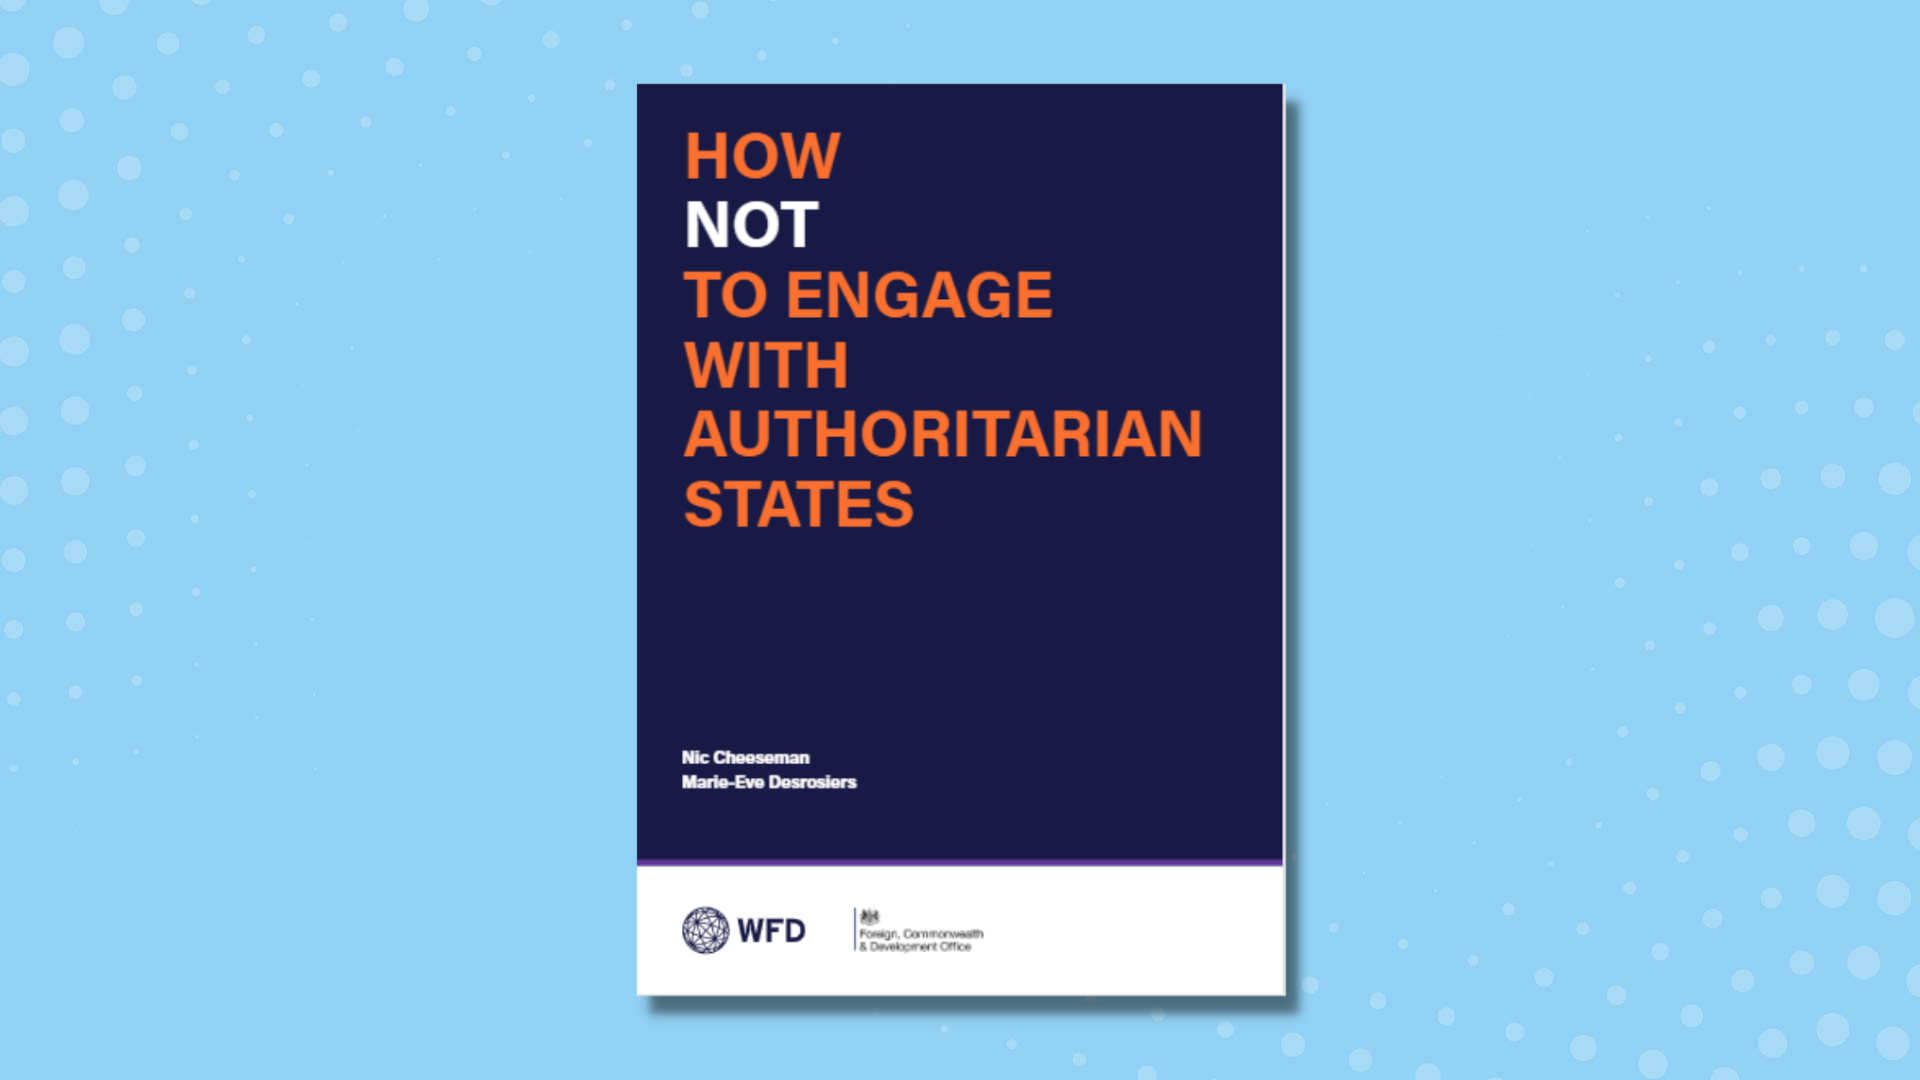 The front cover of the report which has the words how not to engage with authoritarian states in large letters above the names of the authors and the WFD and FCDO logos